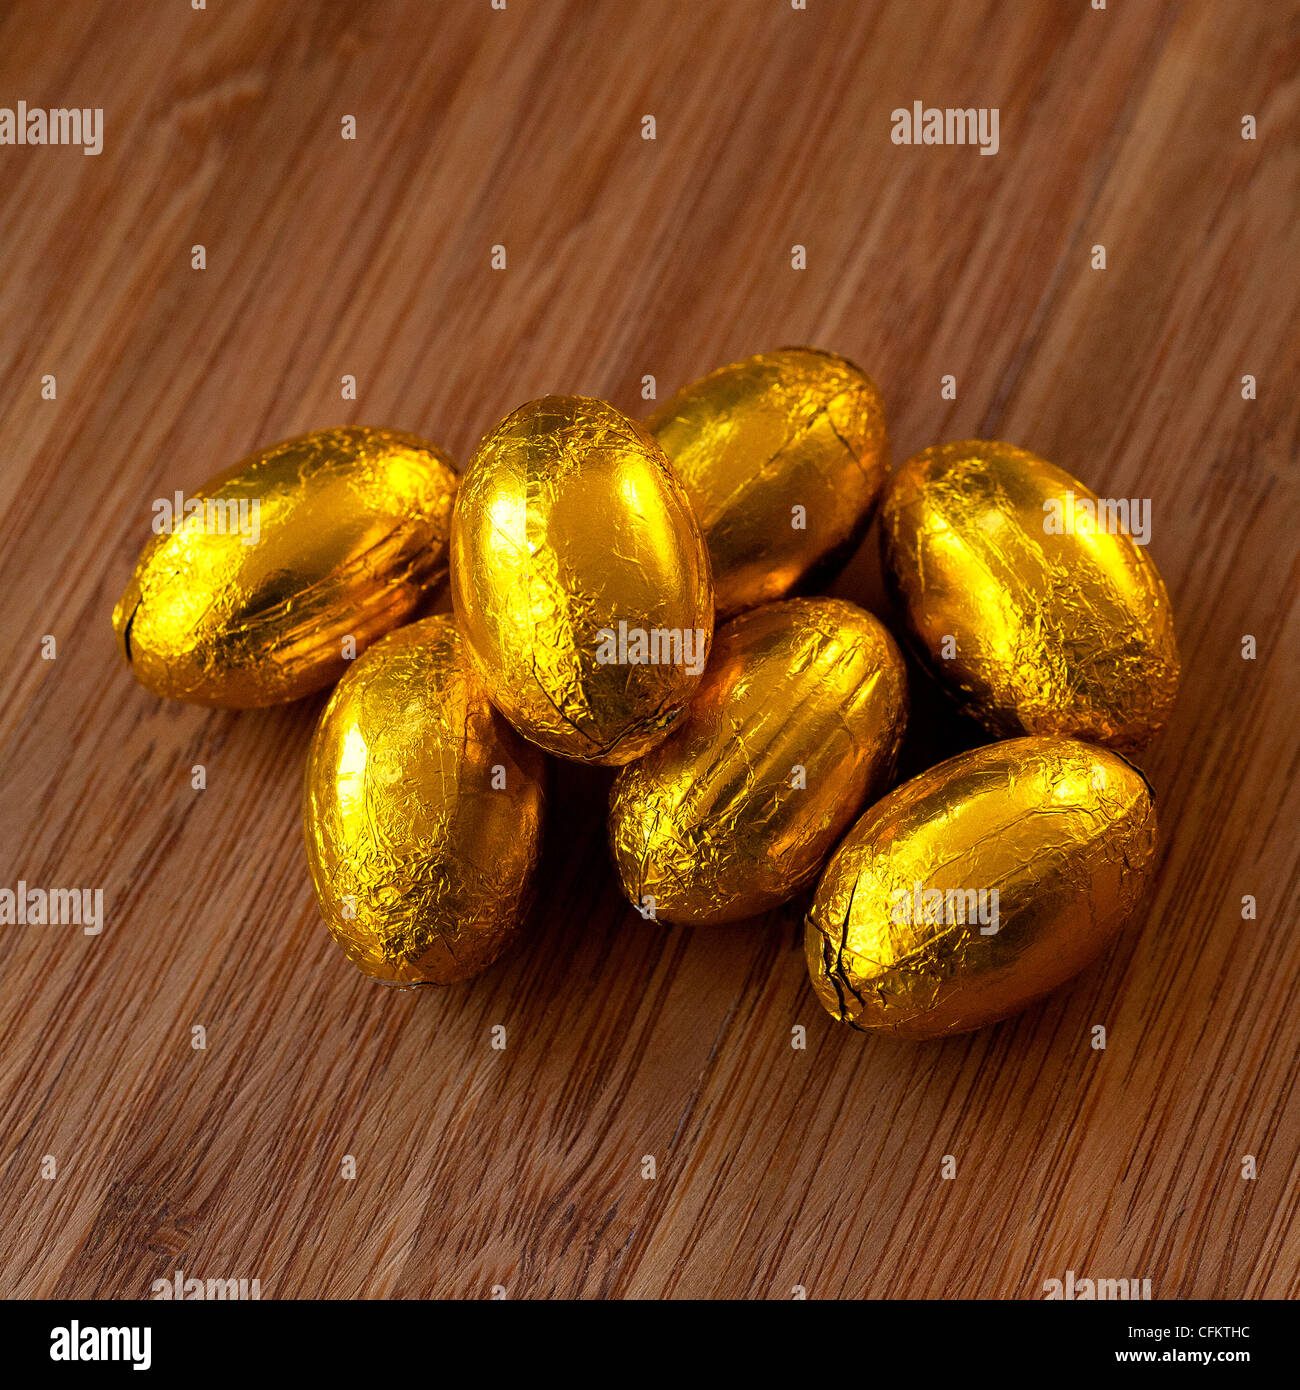 Golden eggs, symbolic in stories as wealth and profit, in reality chocolate sweets a delight at Easter and Christmas. Stock Photo